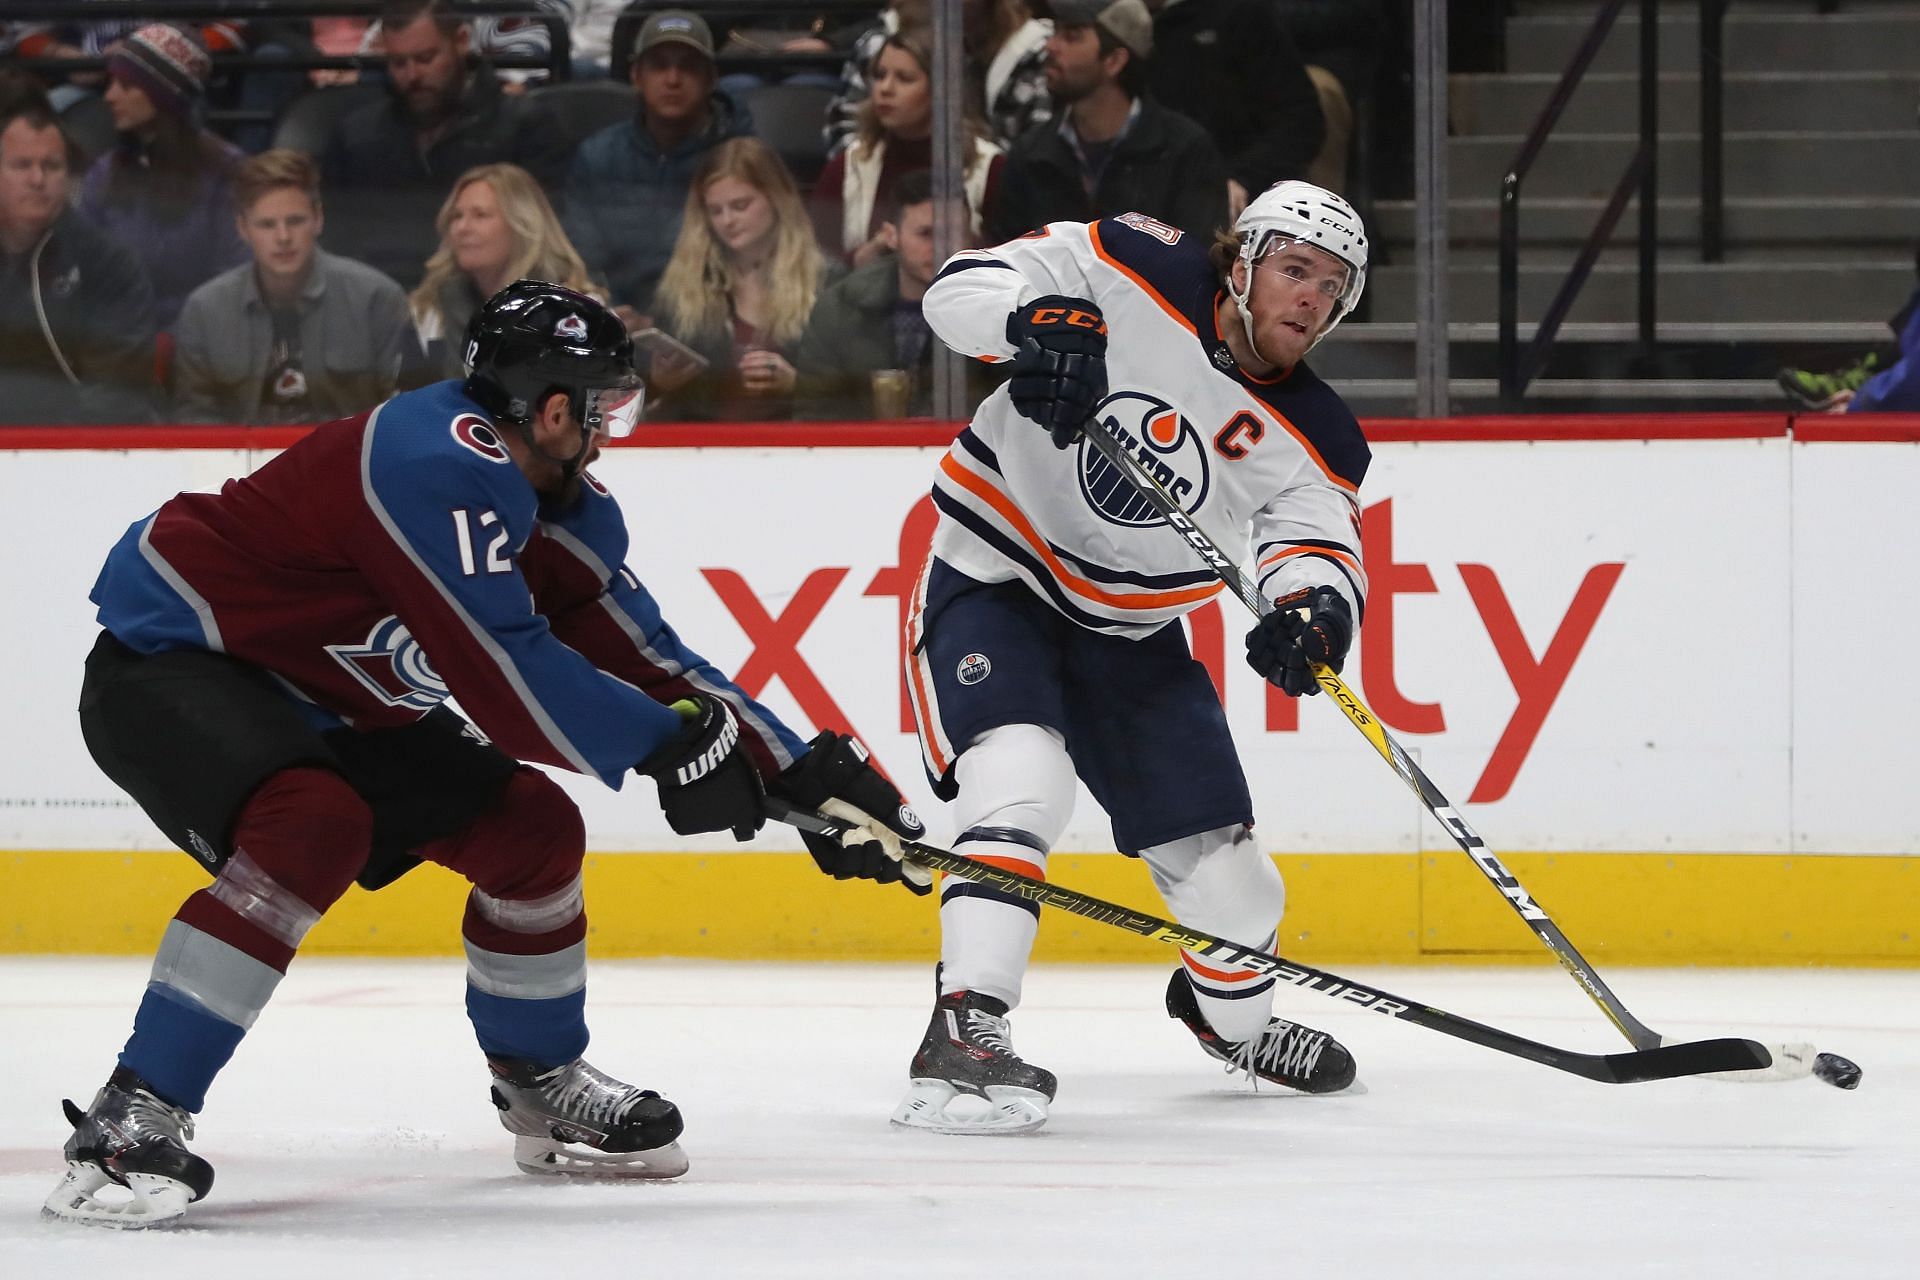 The Colorado Avalanche was 2-1 against the Edmonton Oilers in the regular season.